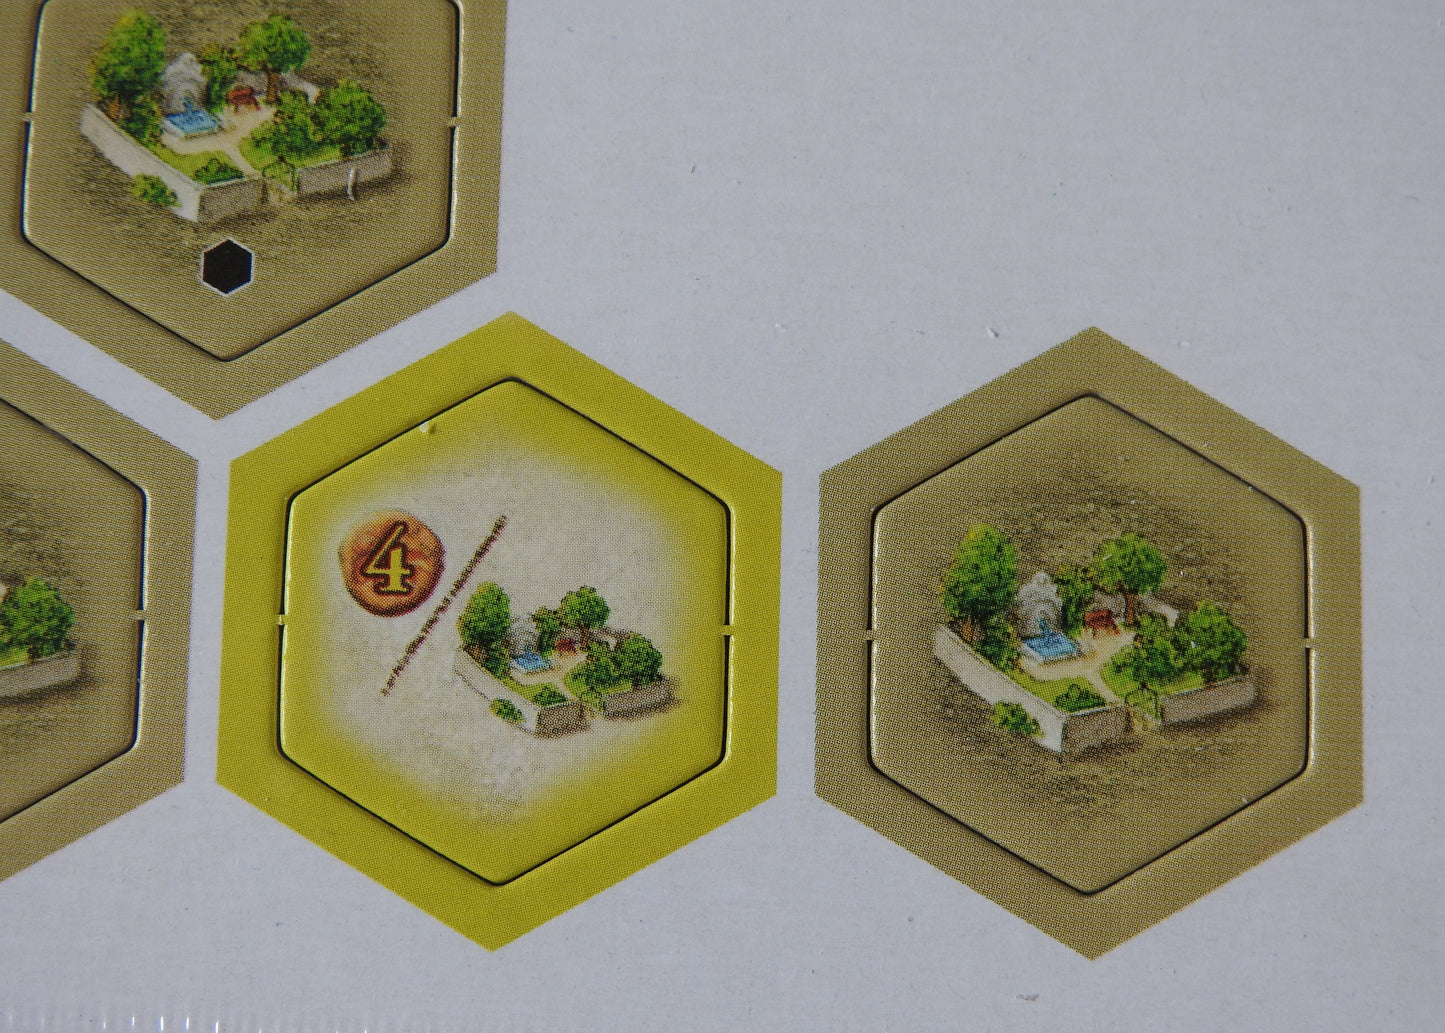 Close-up of one of the knowledge hexes and one of the Pleasure Garden hexes.